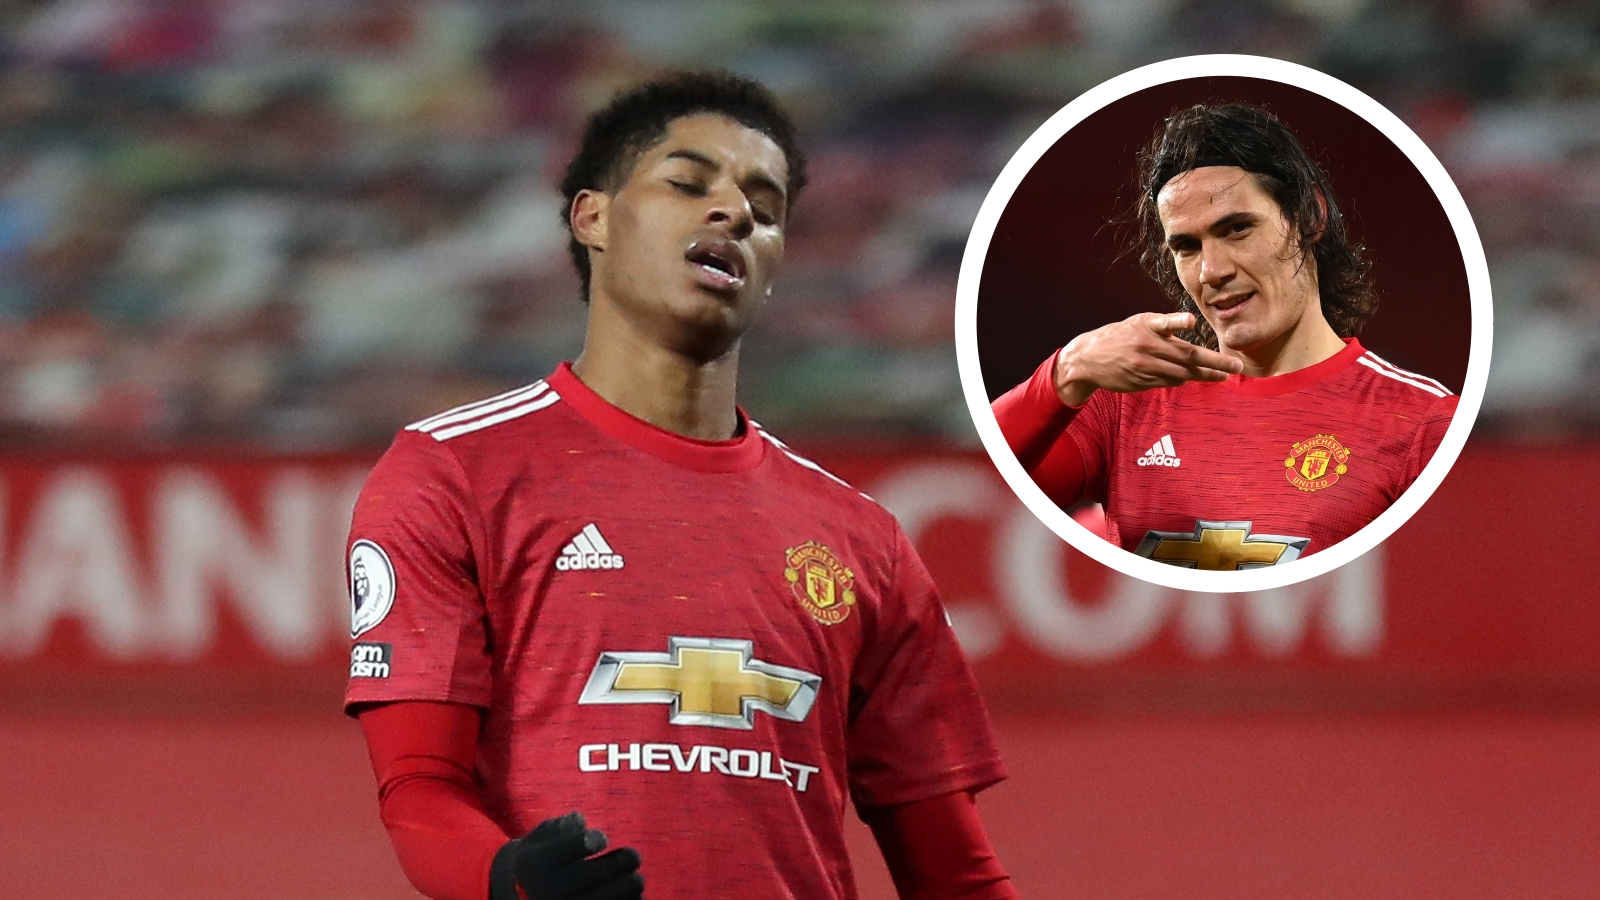 ‘Rashford won’t be a clinical centre-forward like Cavani’ – Man Utd striker can’t be relied upon to get 20 goals, says Cole